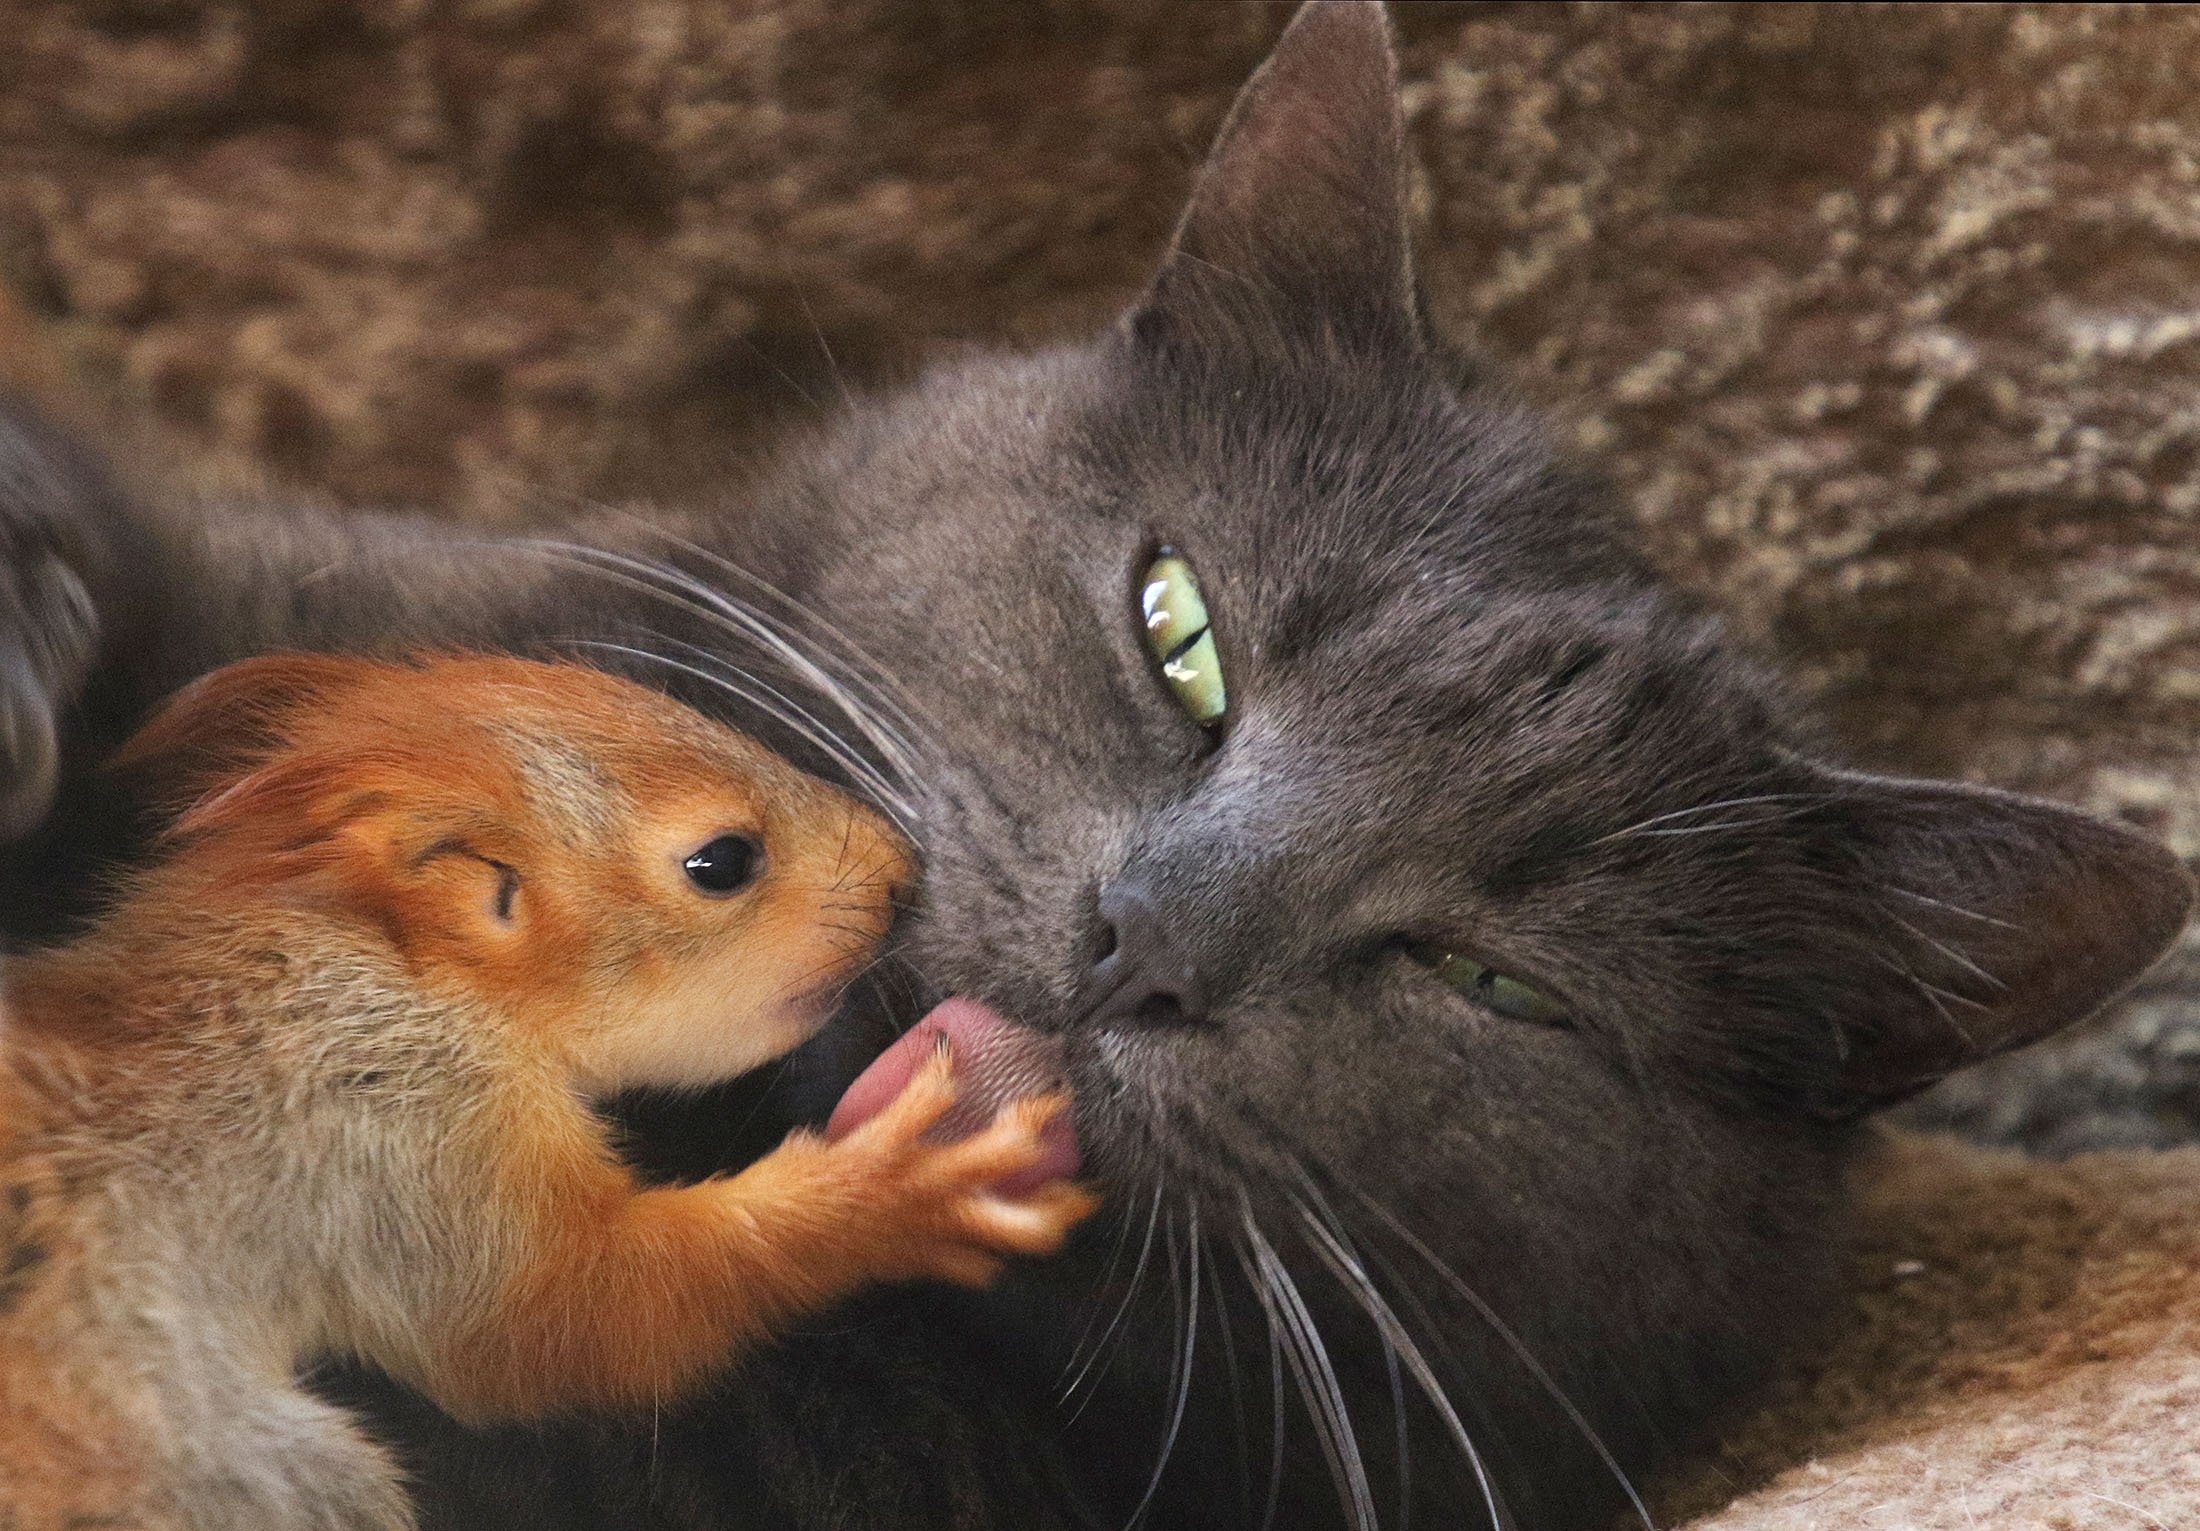 In photos: Unusual animal friendships | Daily Sabah